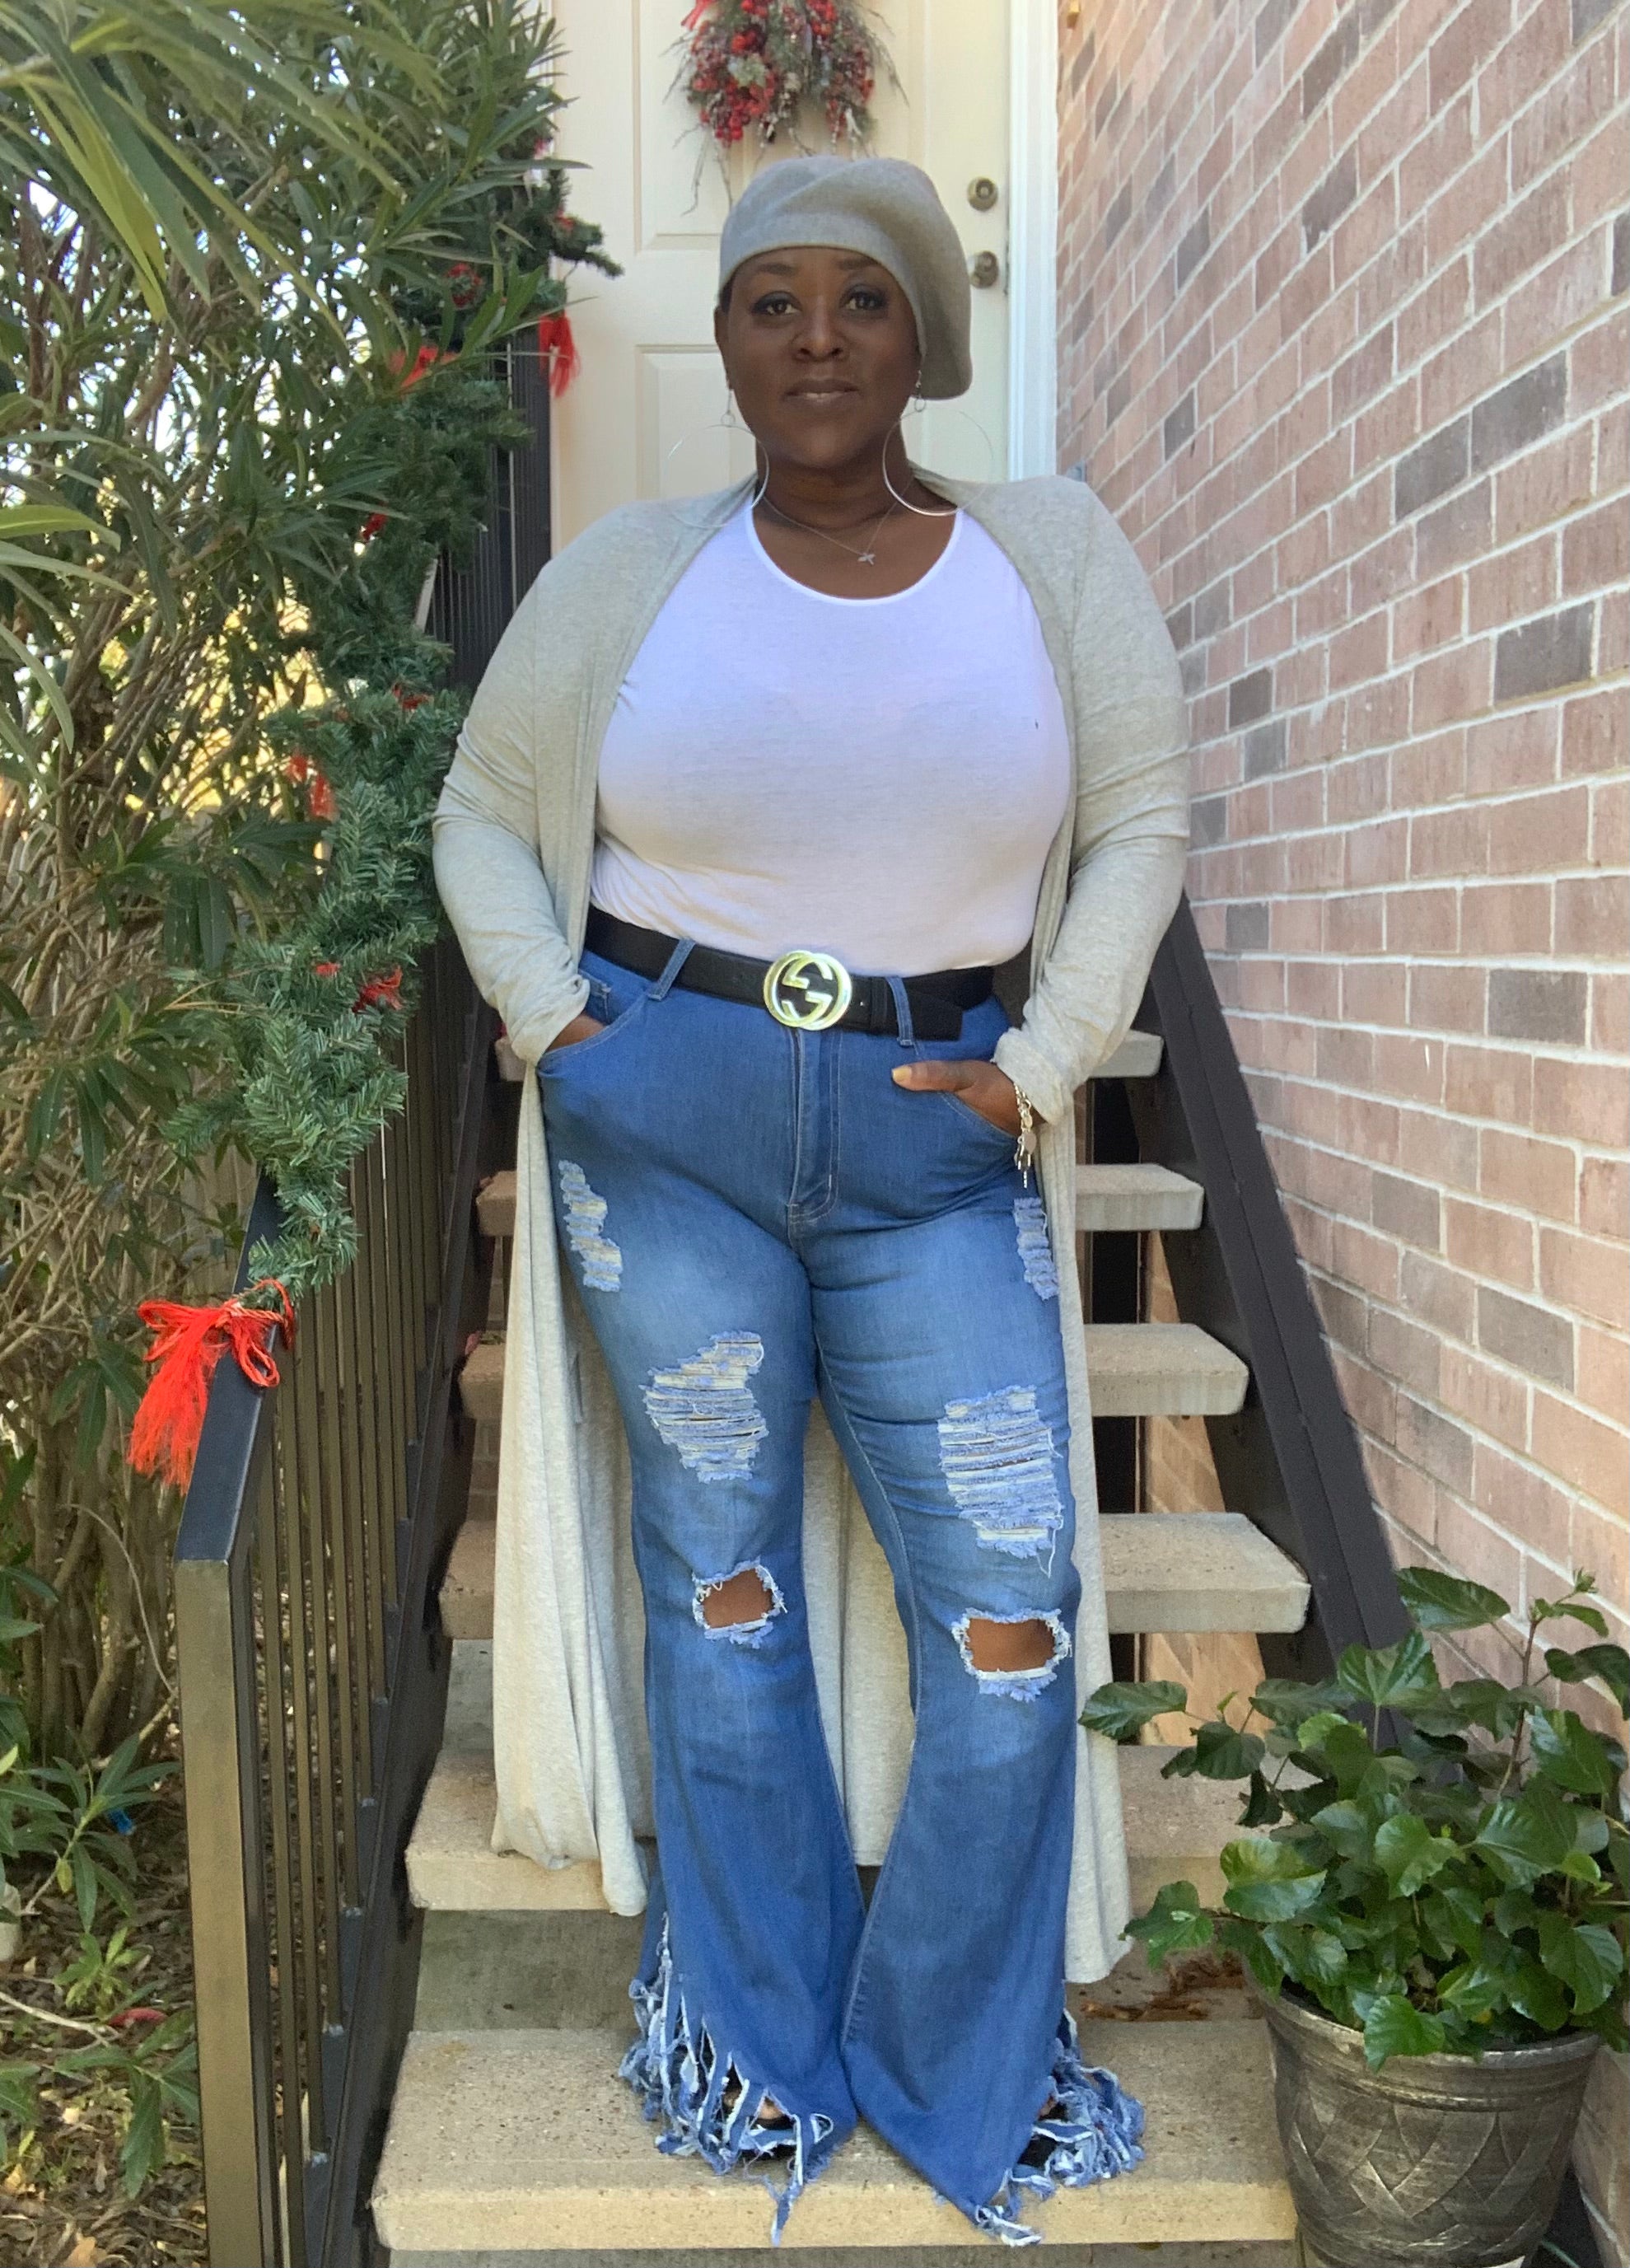  Bell Bottoms Plus Size